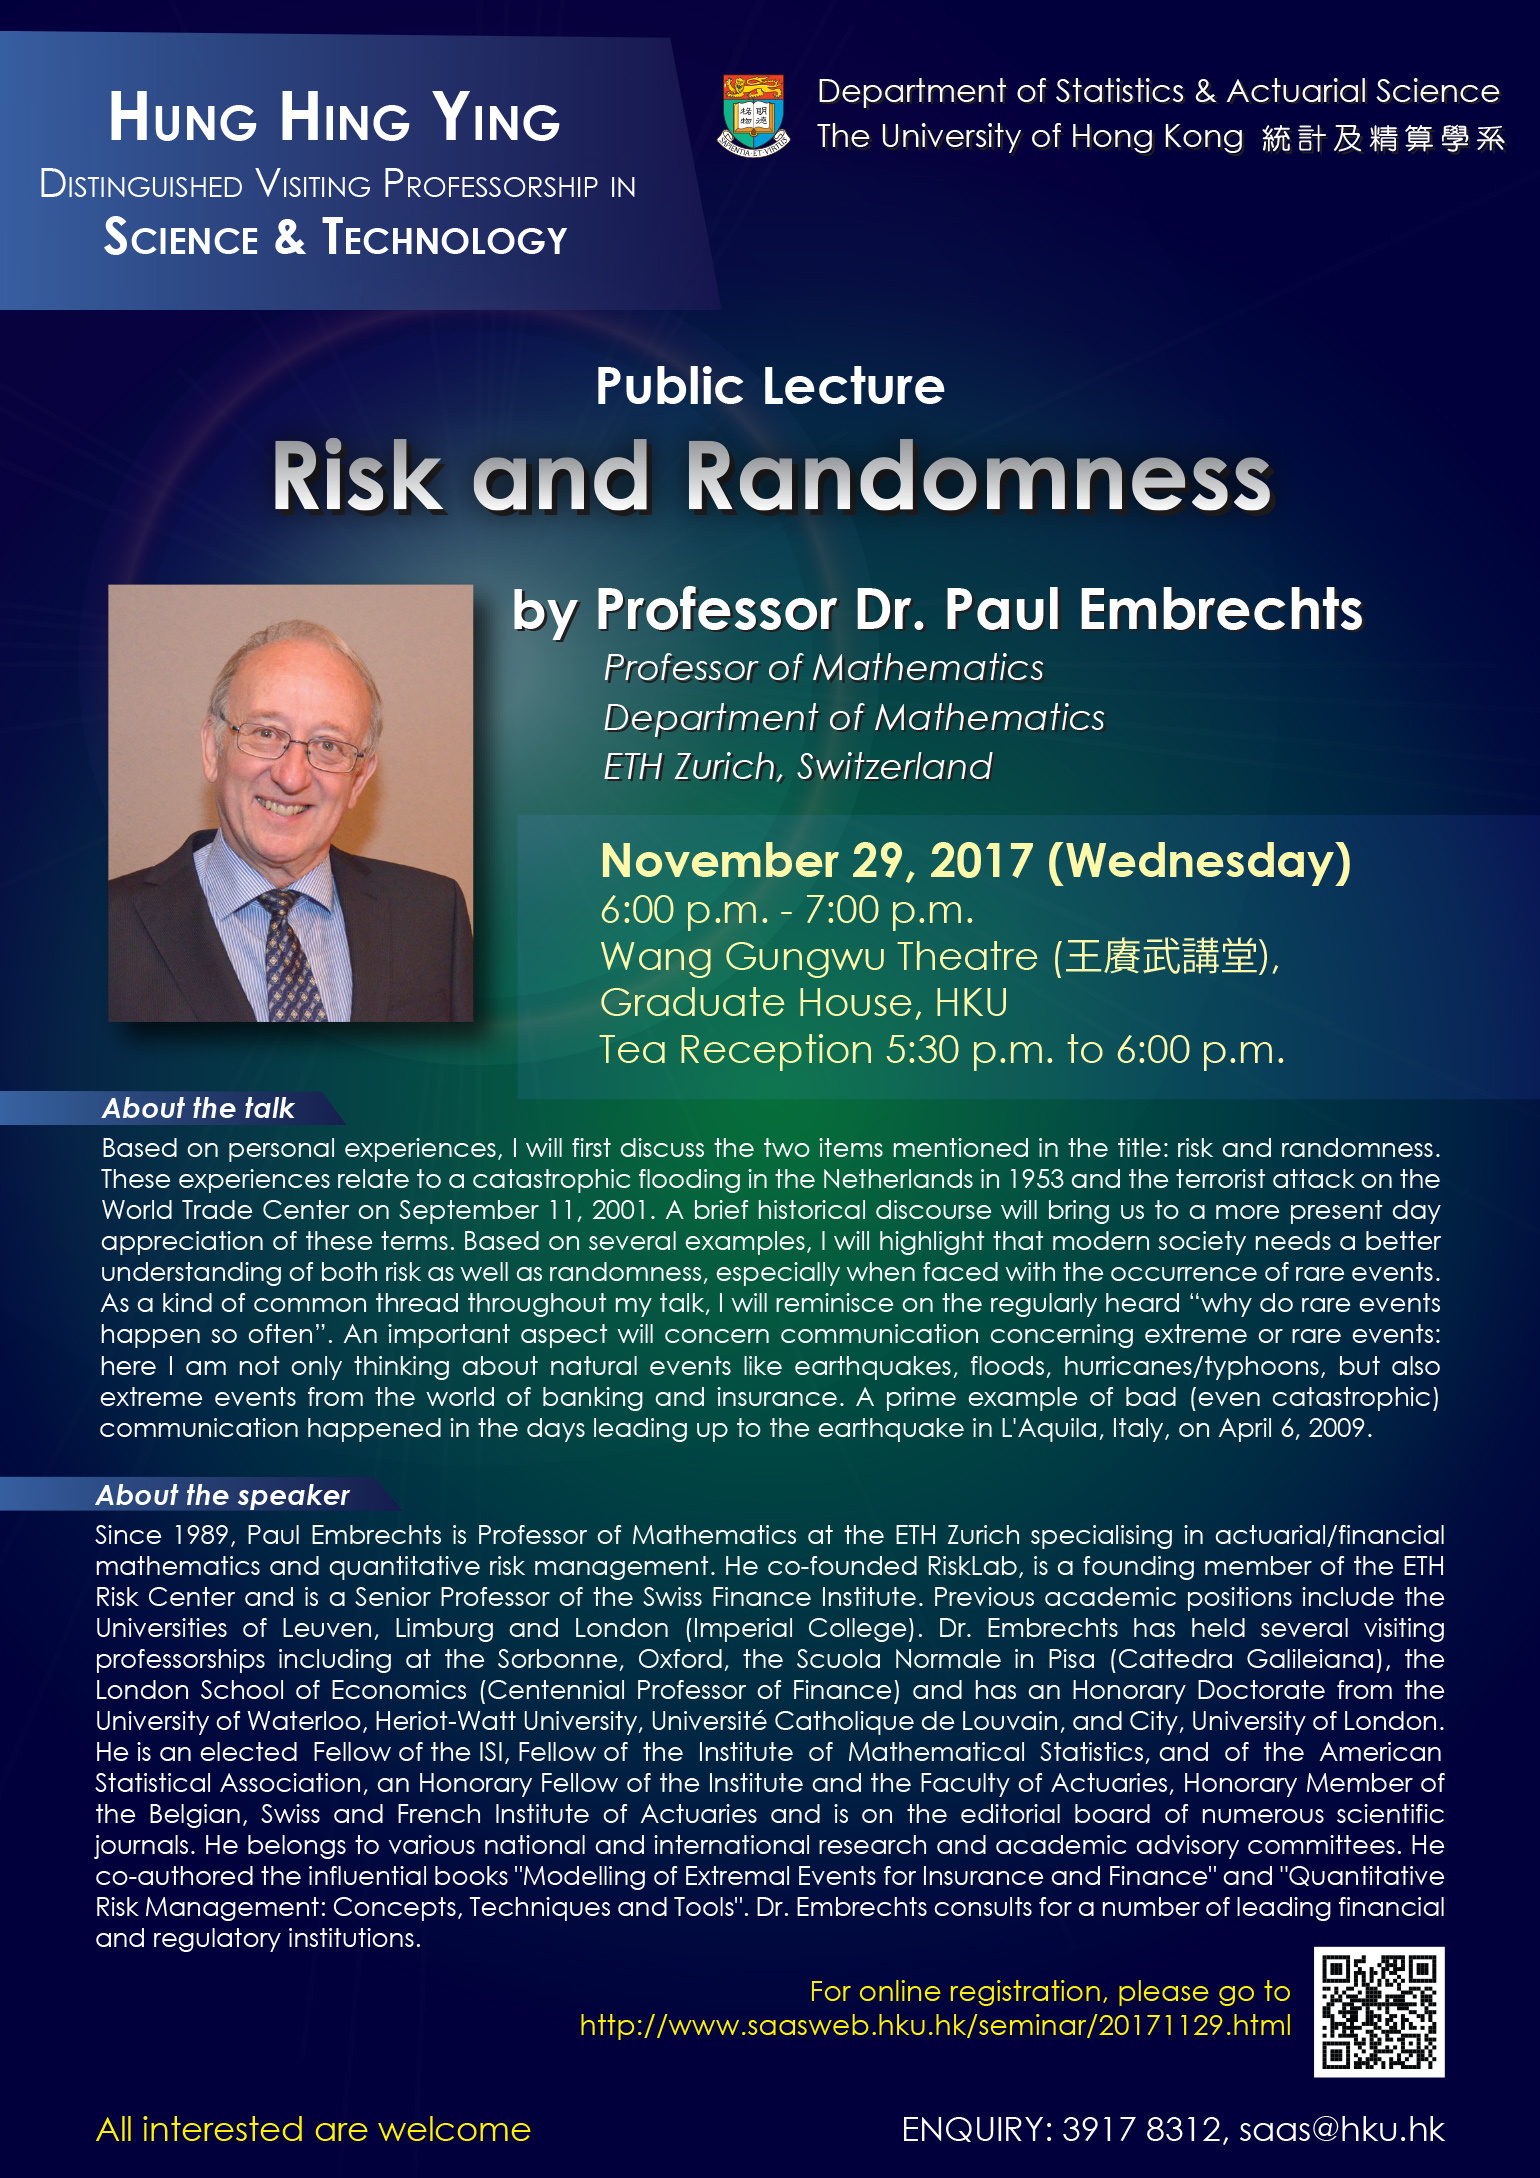 Hung Hing Ying Distinguished Visiting Professorship in Sci & Technology by Prof. Dr. Paul Embrechts on November 29, 2017